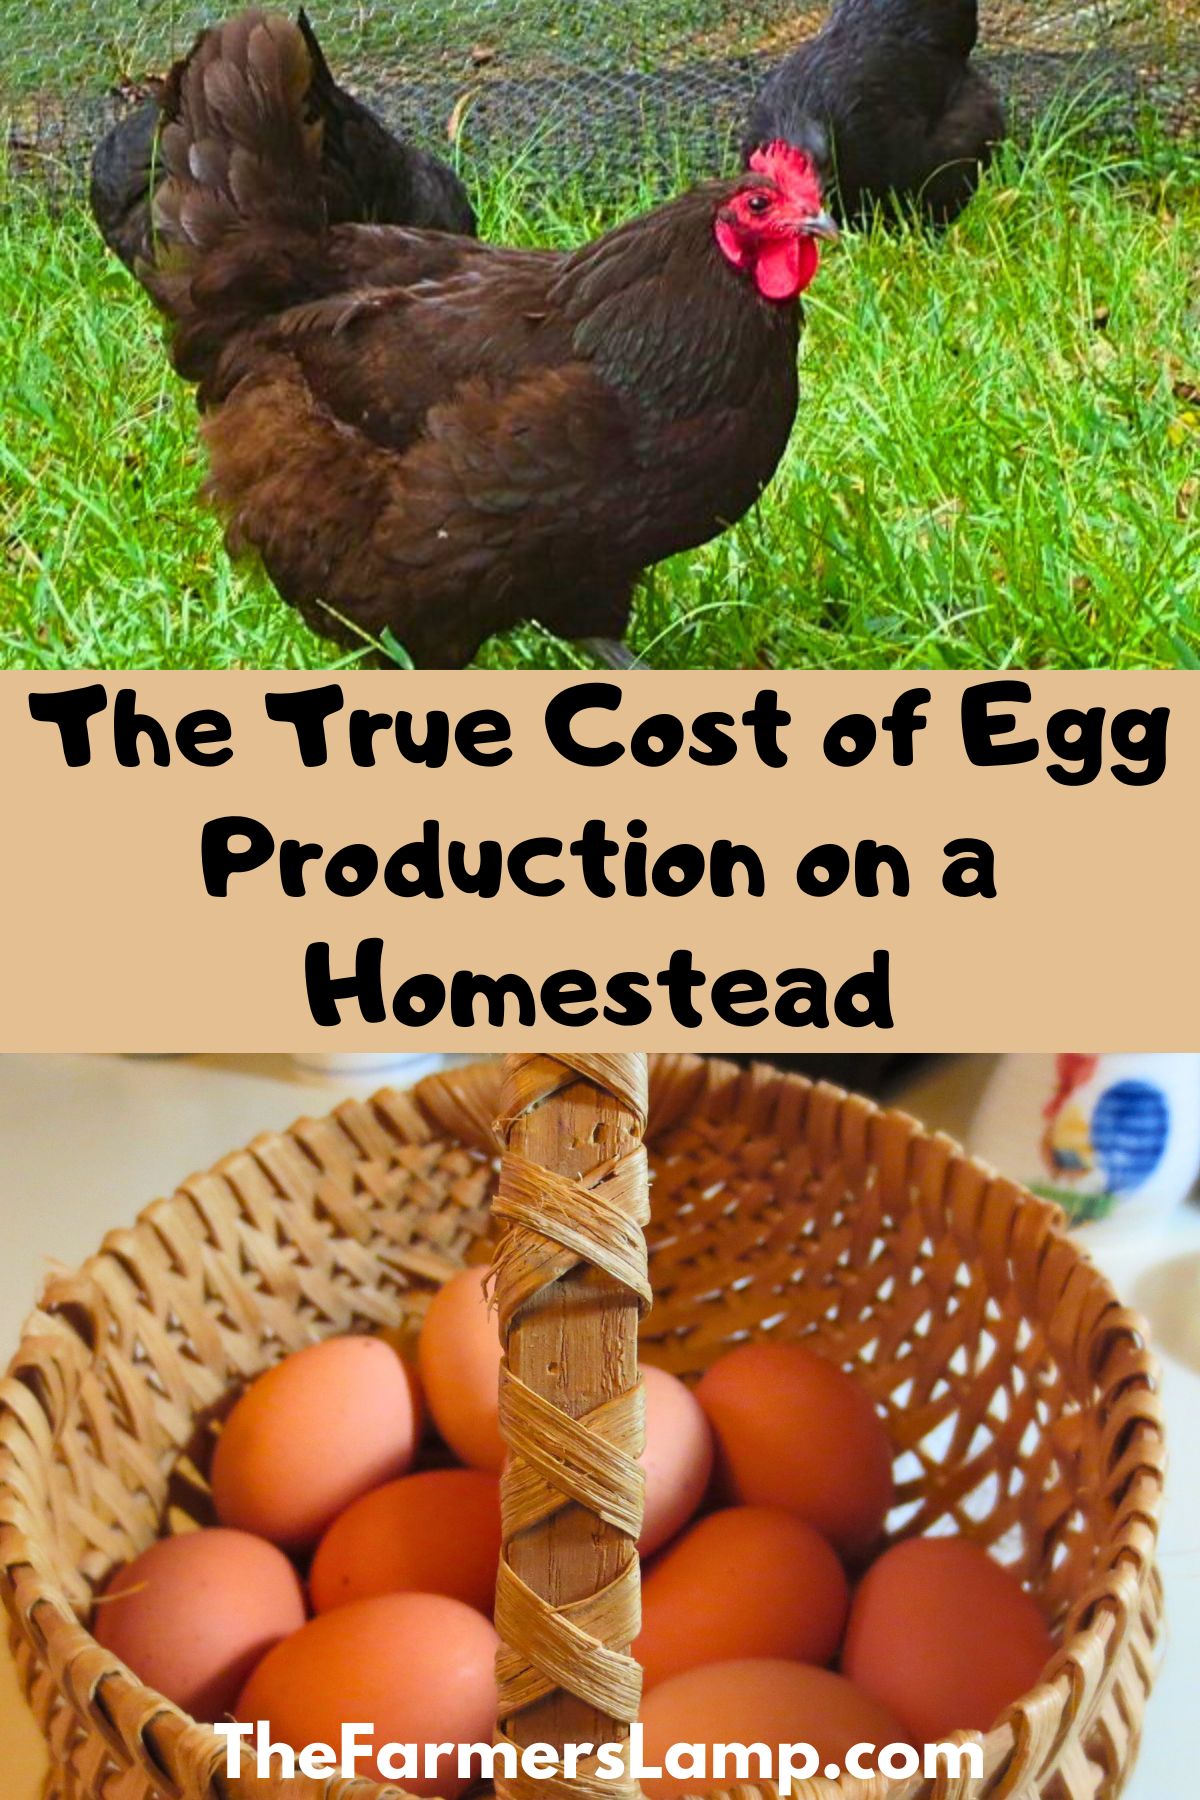 a black australorp hen free ranging in grass and a hand woven egg basket with brown eggs in it with words written that read the true cost of egg production on a homestead the farmers lamp dot com